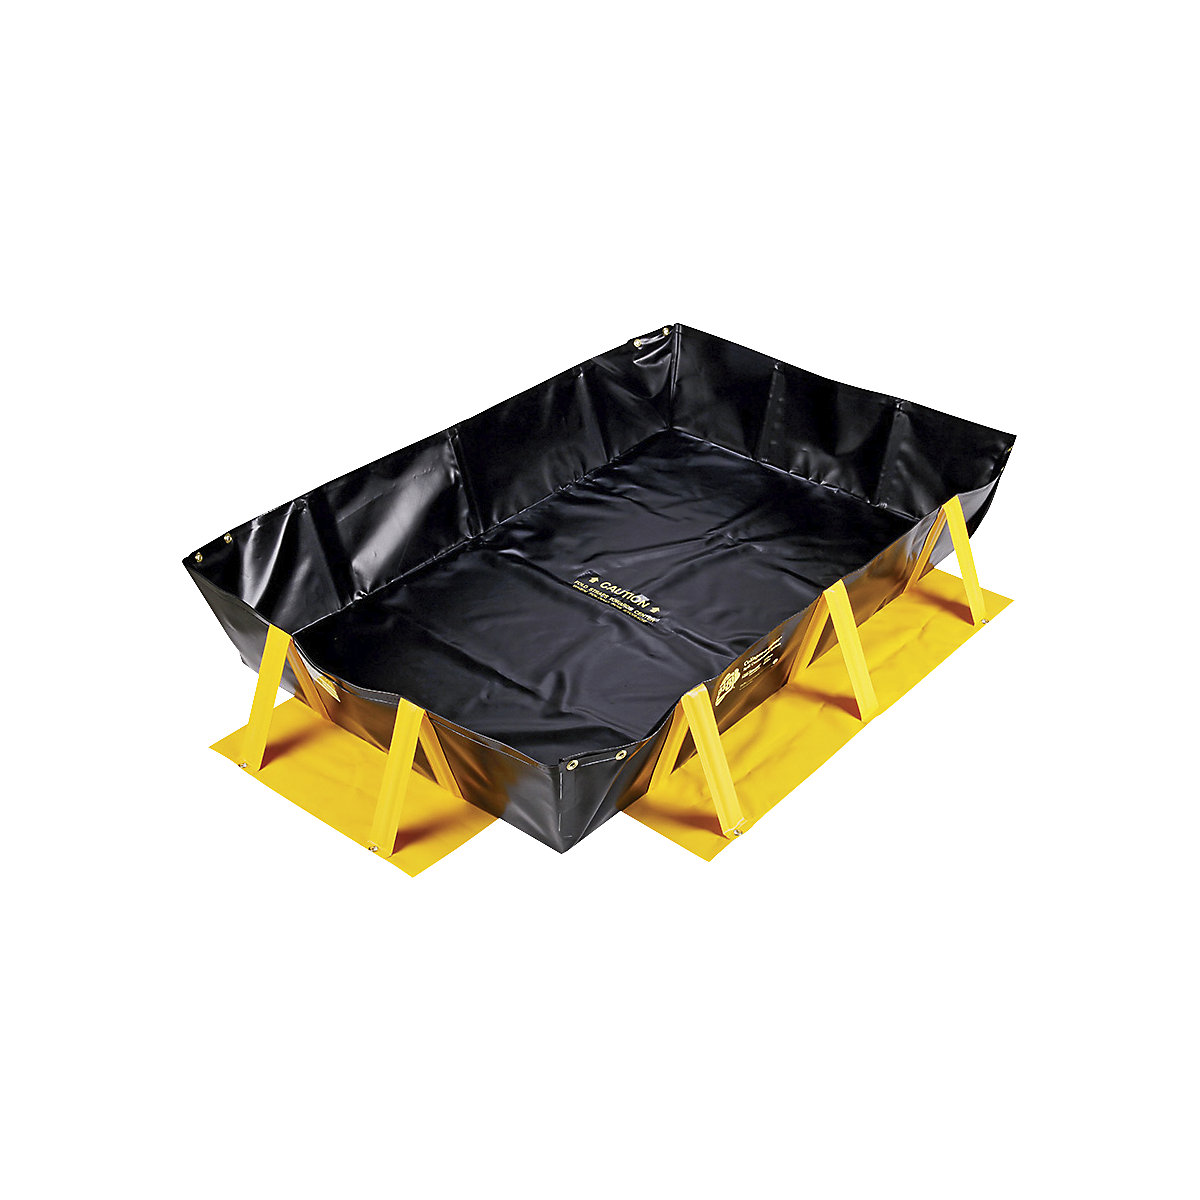 Collapse-A-Tainer® emergency folding tray - PIG